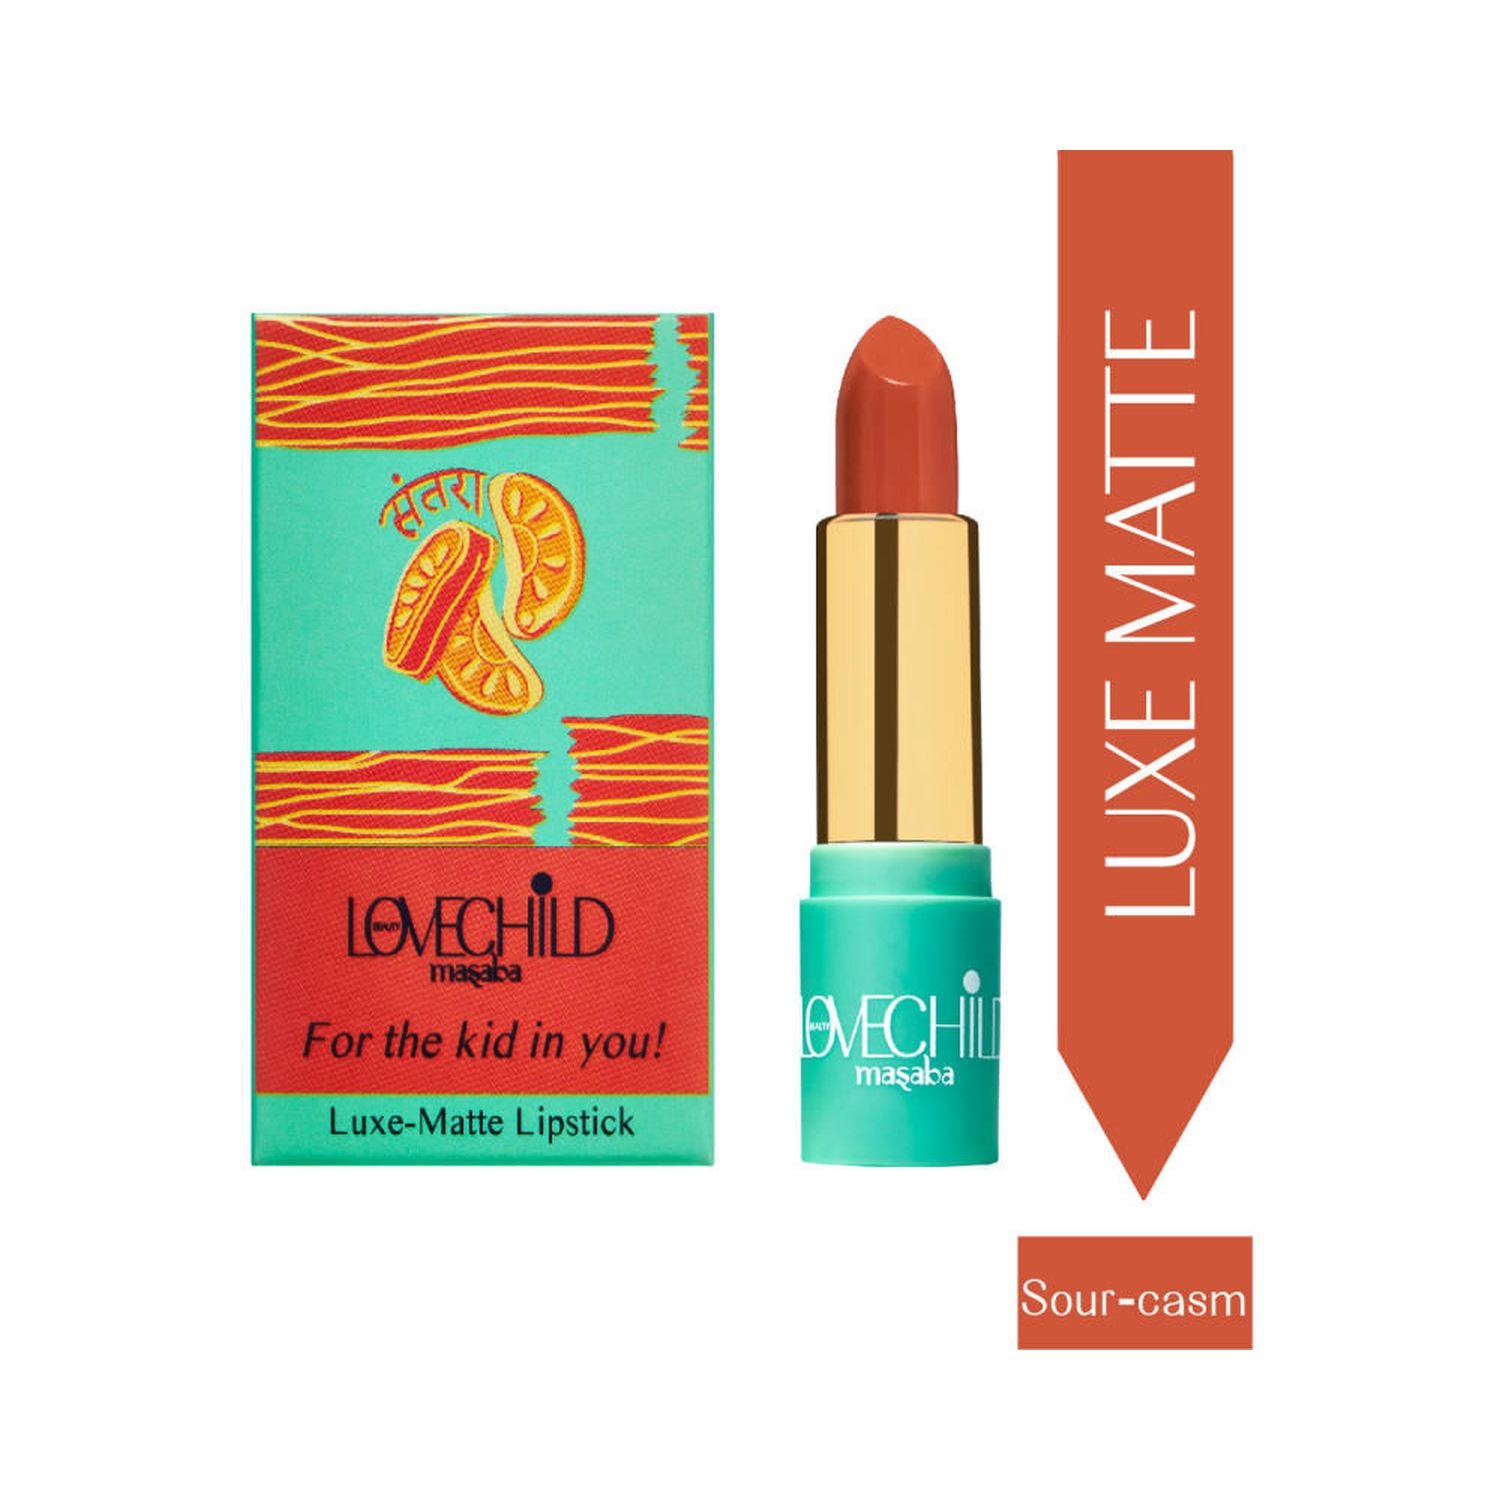 LoveChild Masaba | LoveChild Masaba For The Kid In You! Luxe Matte Lipstick - 09 Sour-Casm (4g)